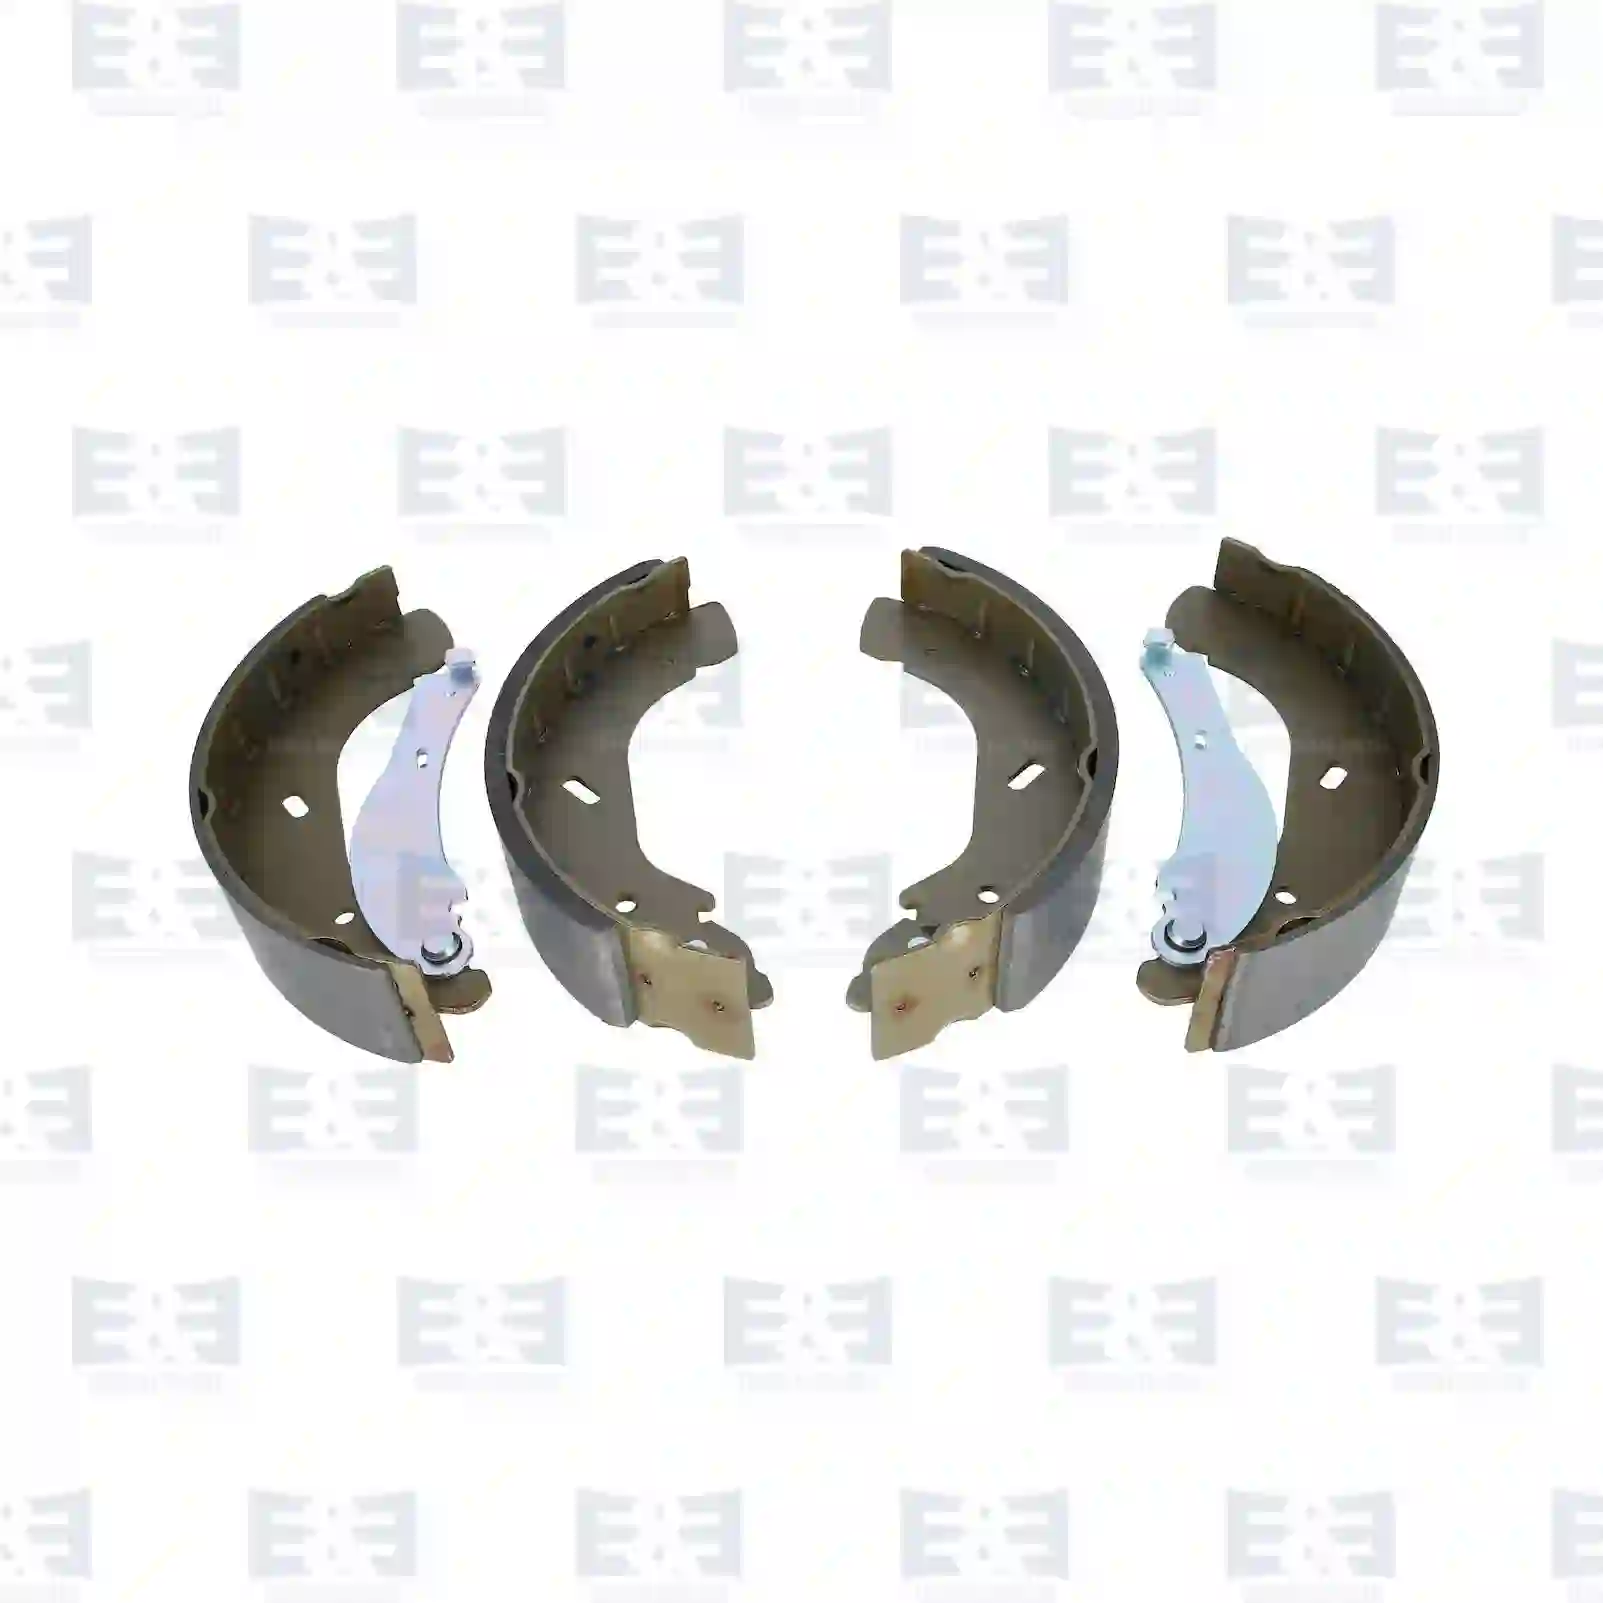 Brake shoe kit, with linings, 2E2296615, 4841295, 4841296, YC15-2B256-AF, YC15-2B256-BF ||  2E2296615 E&E Truck Spare Parts | Truck Spare Parts, Auotomotive Spare Parts Brake shoe kit, with linings, 2E2296615, 4841295, 4841296, YC15-2B256-AF, YC15-2B256-BF ||  2E2296615 E&E Truck Spare Parts | Truck Spare Parts, Auotomotive Spare Parts